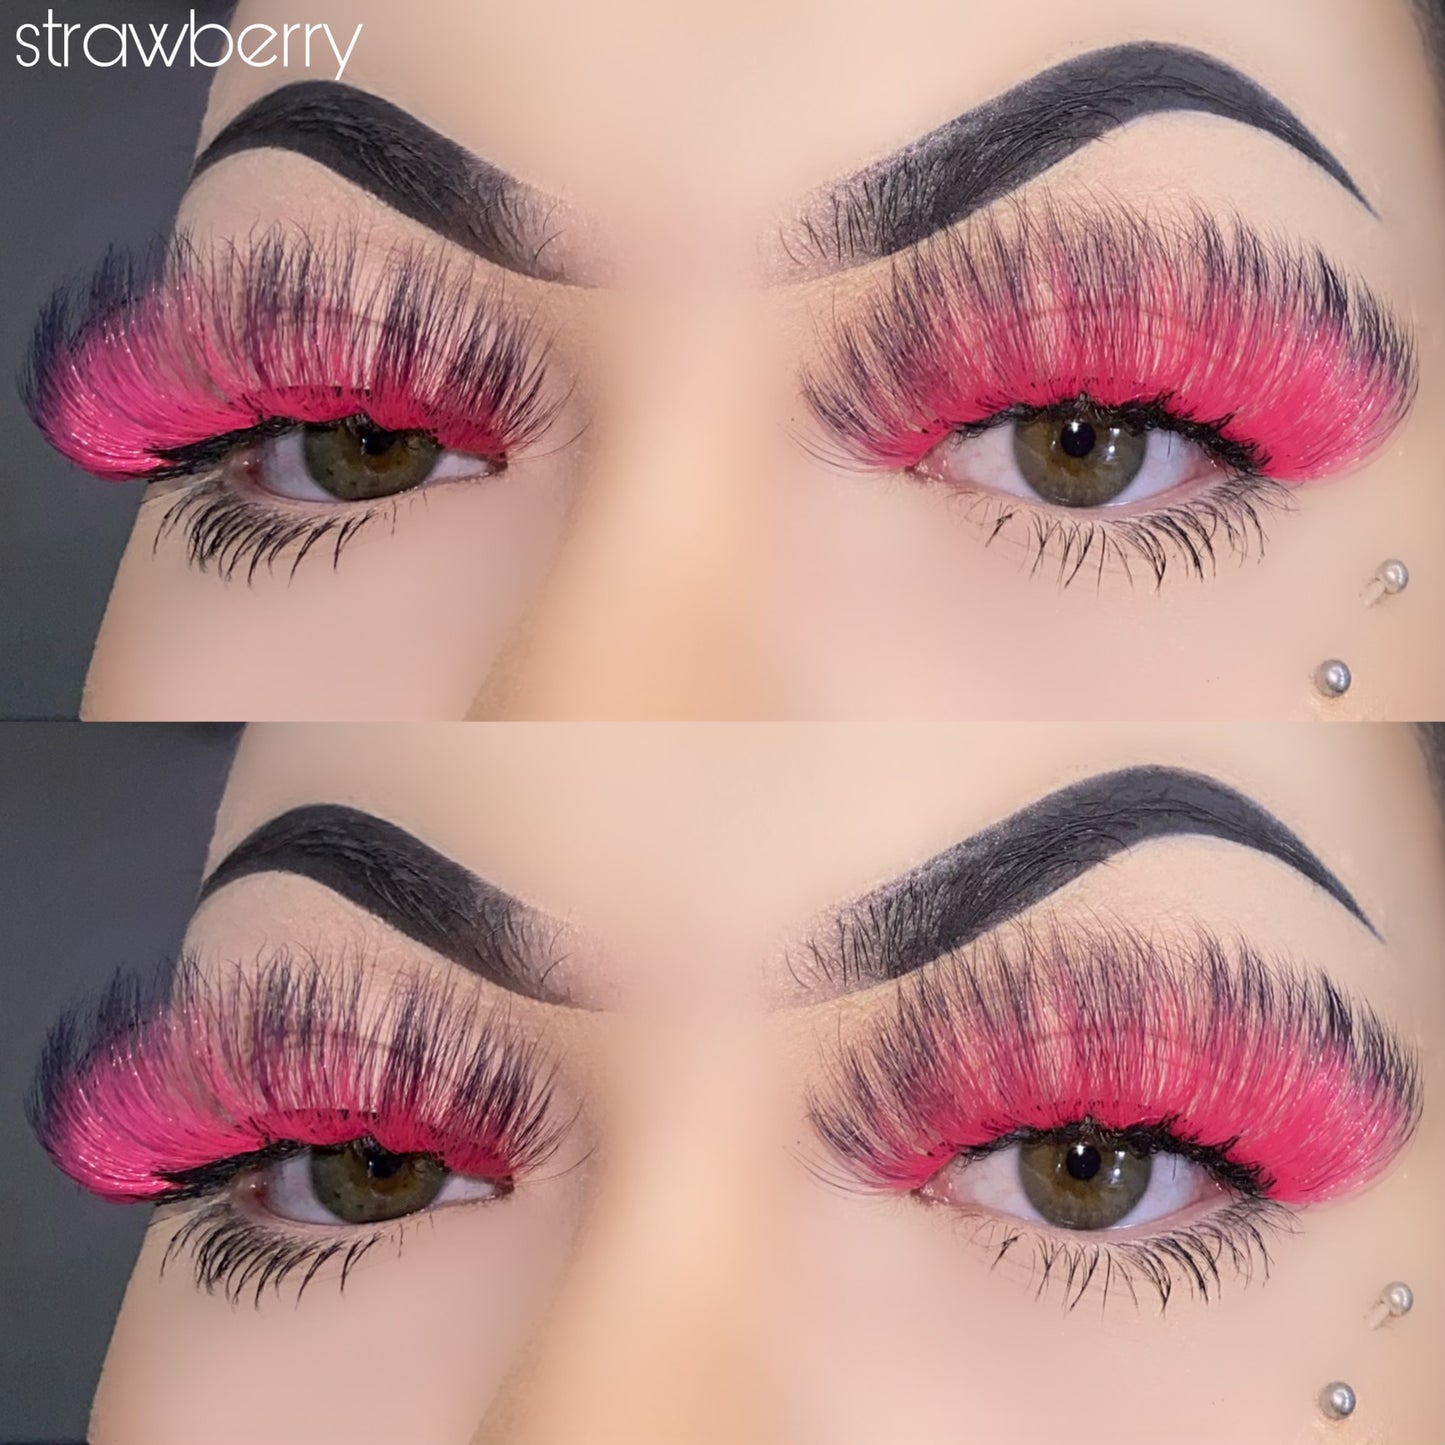 Strawberry - Pink Ombre Lashes